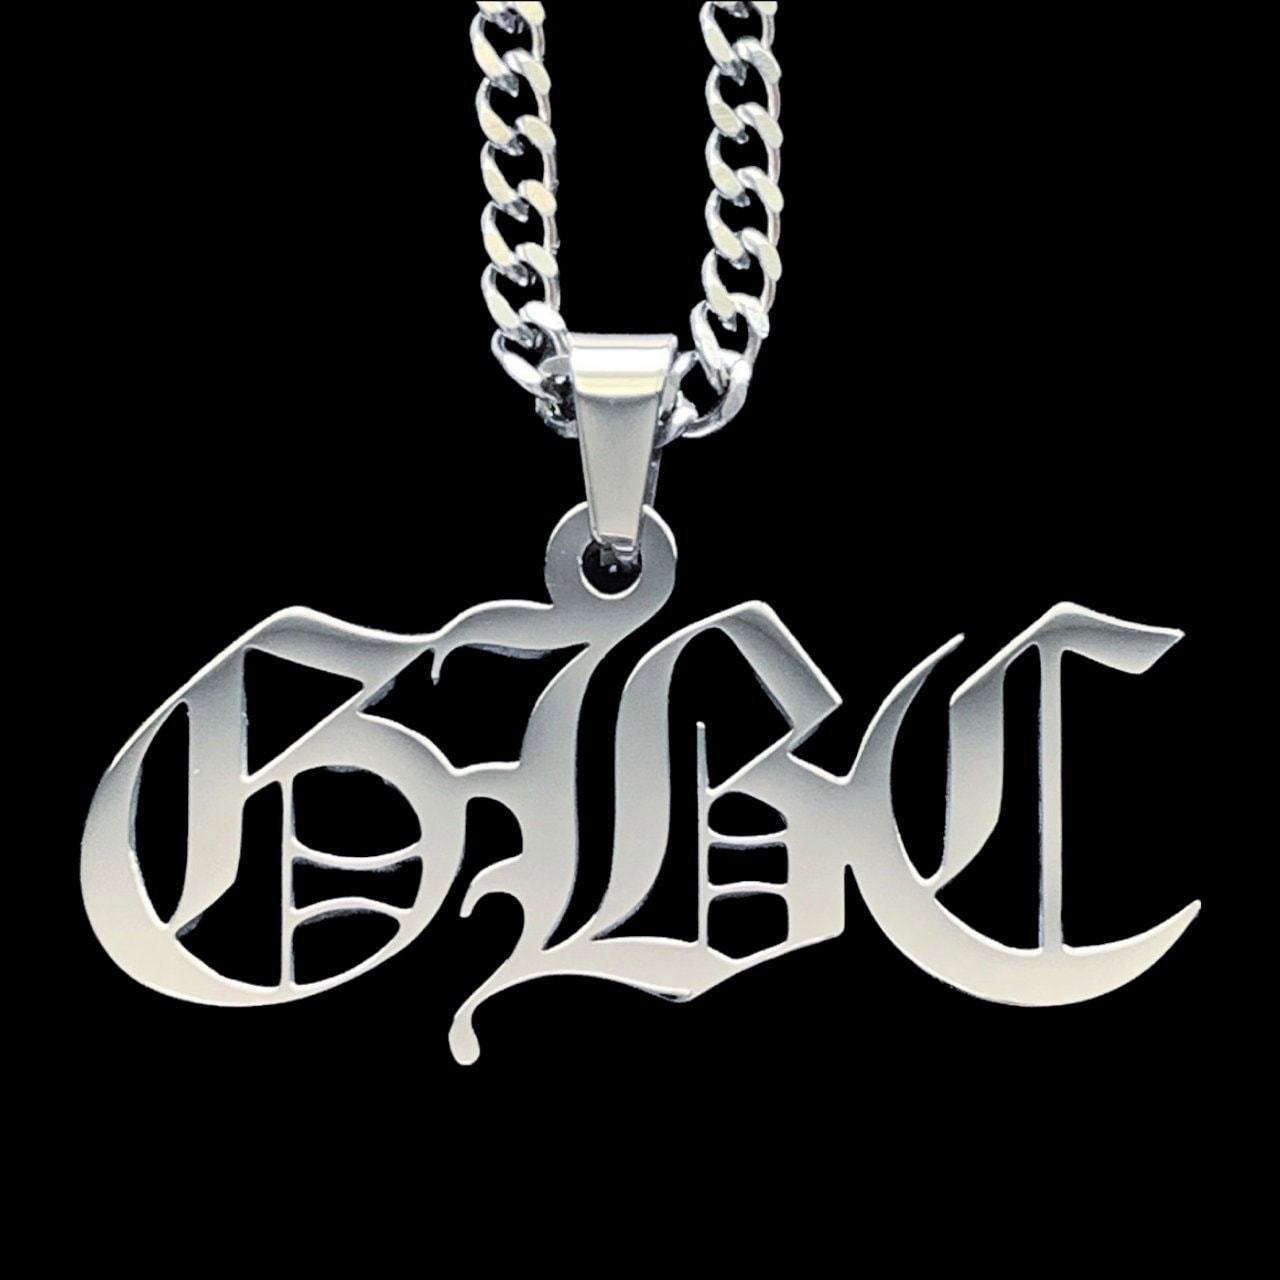 Mens Cool ICP Stainless Steel Lil Peep Pendant Necklace Braided Chain 4mm 30